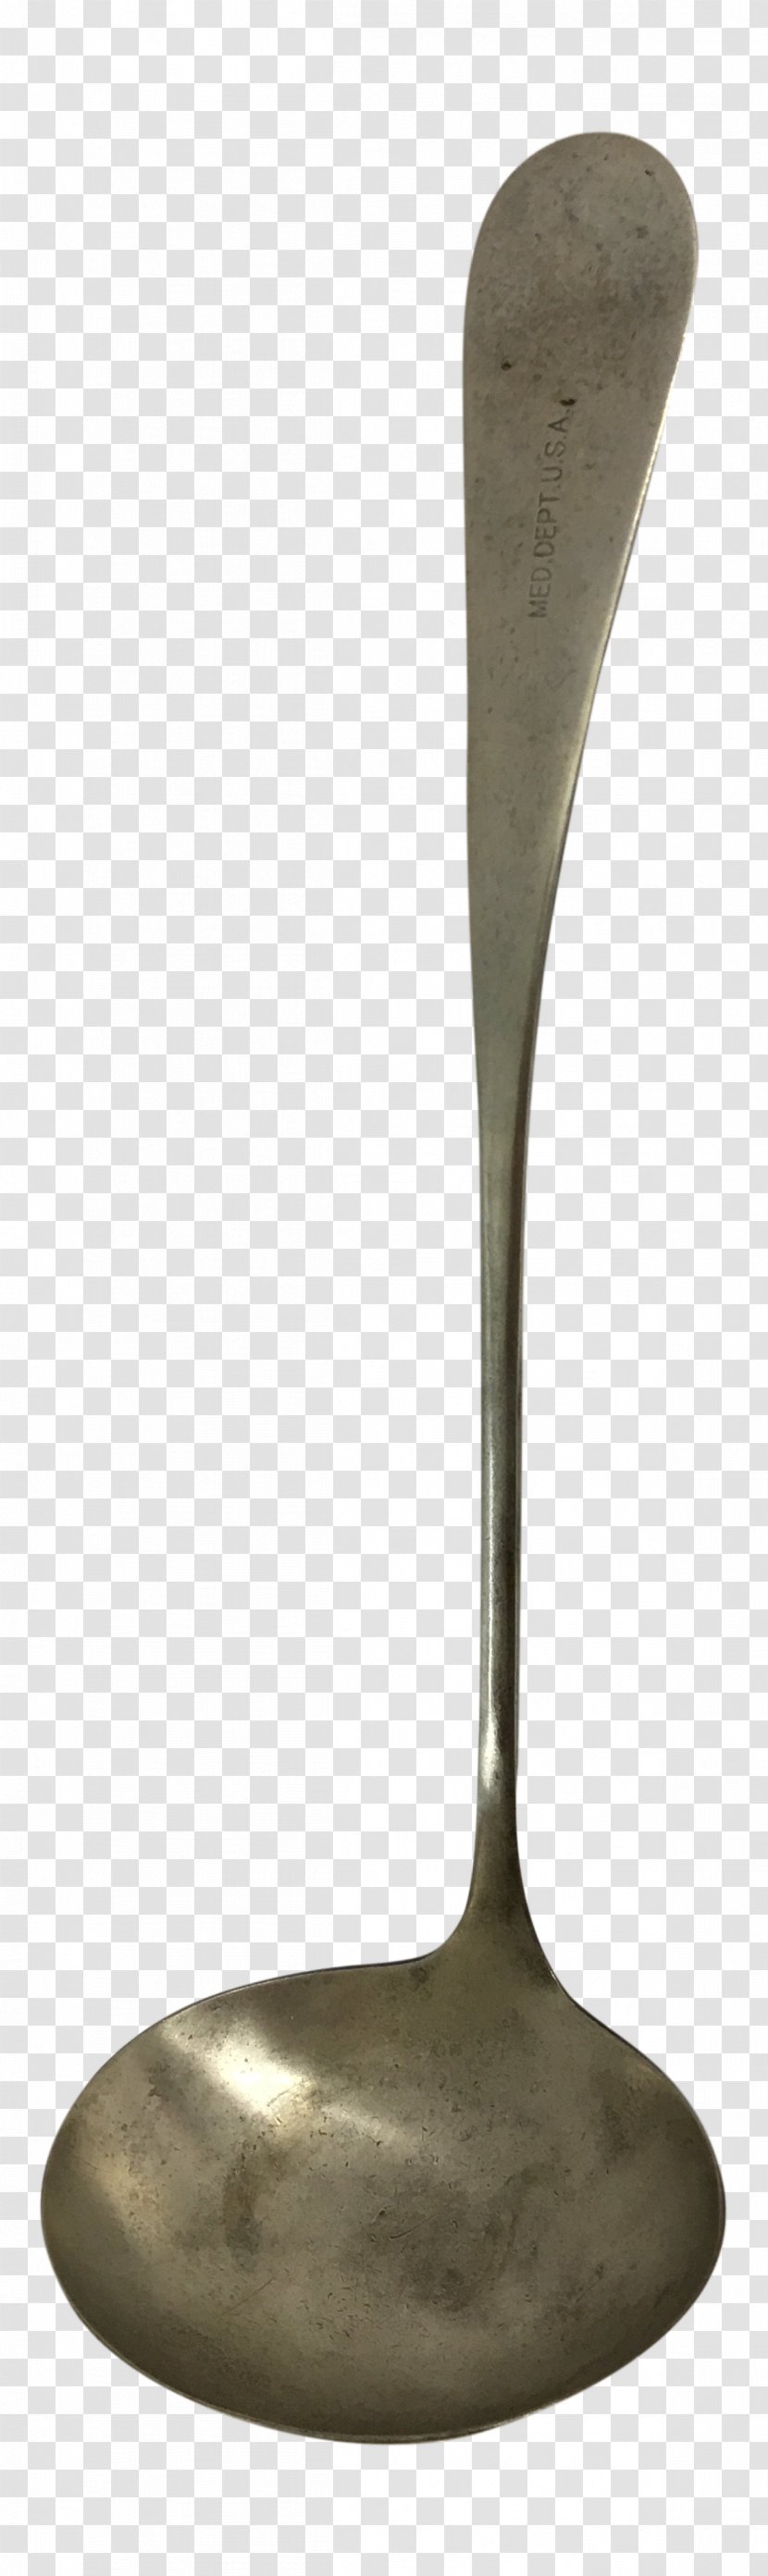 Metal Background - Cutlery Transparent PNG